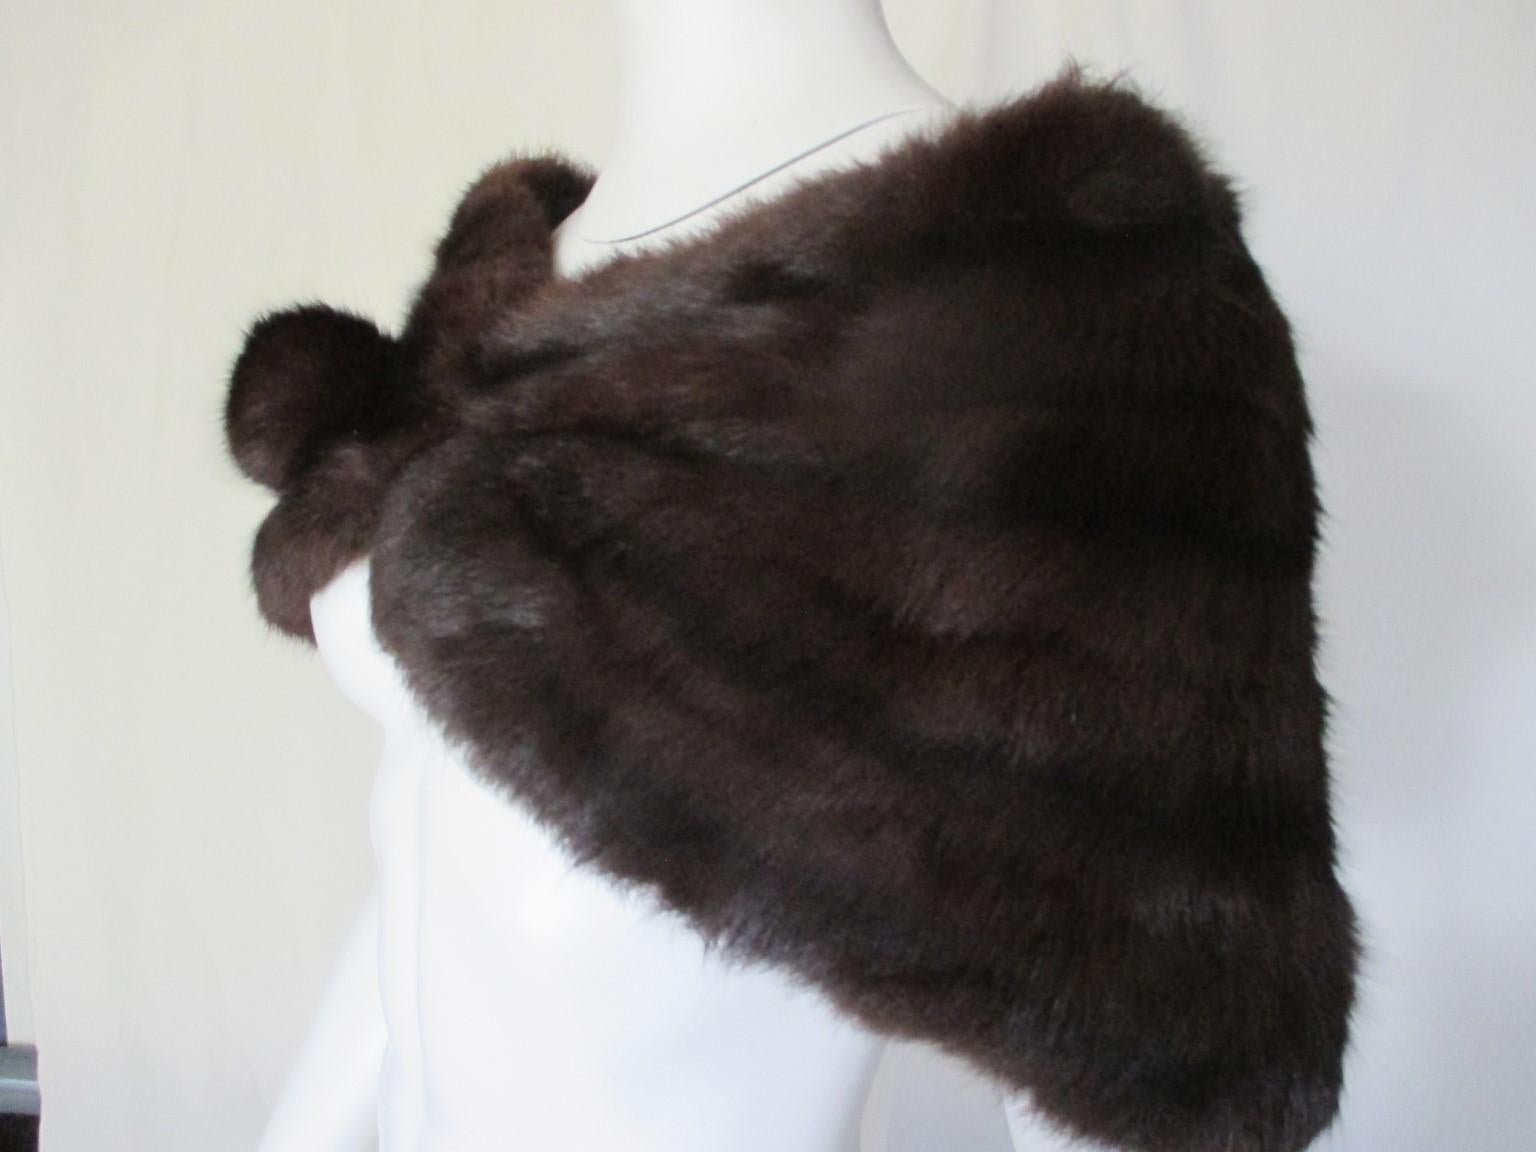 This vintage beautiful stole is made of very soft dark brown fur and is light to wear, with brown lining, 2 press buttons closures and at front a decorative fur button.

We offer more luxury fur, view our storefront.

Details:
Furrier: Goodfriends,